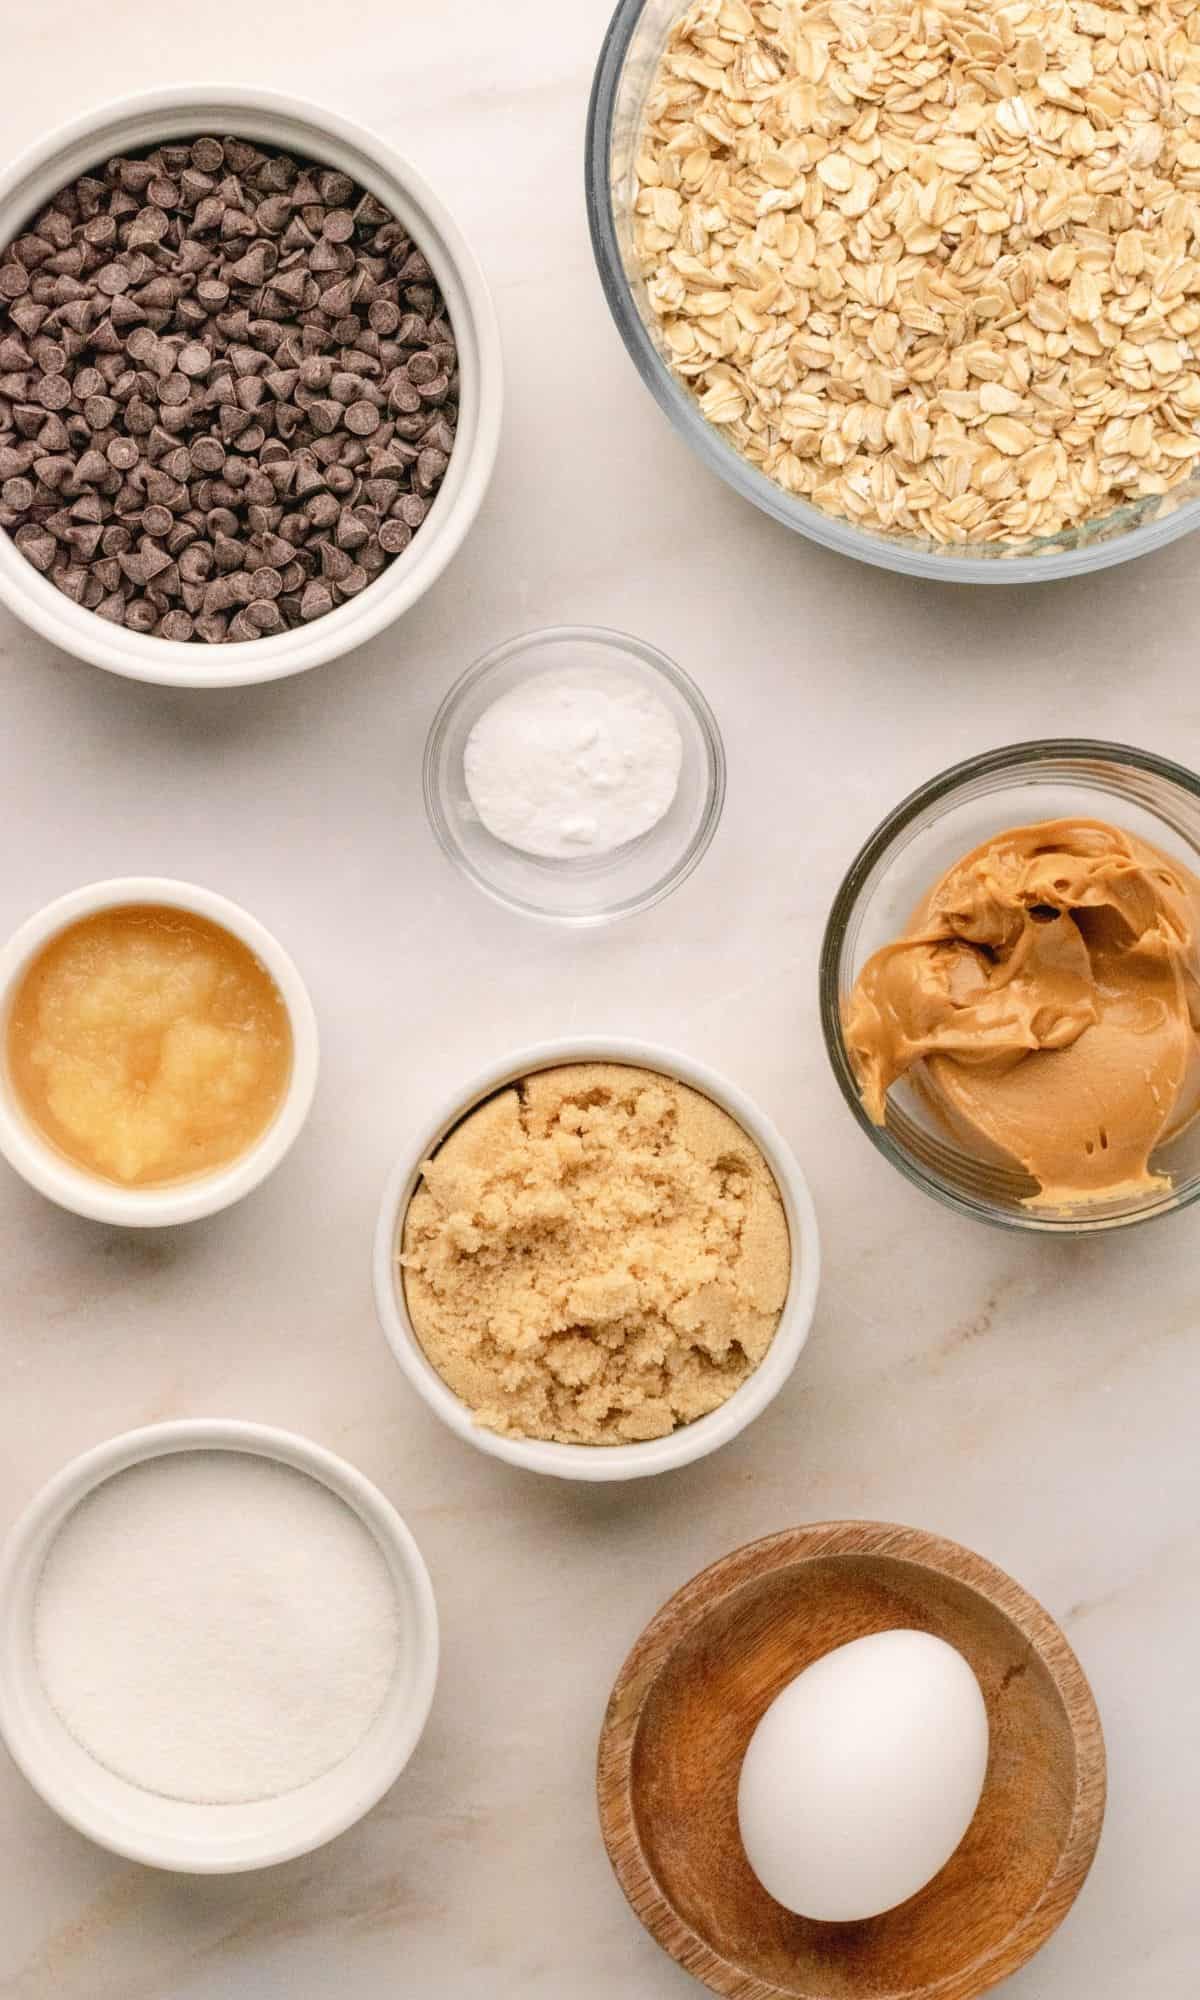 Peanut butter chocolate chip cookie ingredients in varying bowl shapes and sizes.